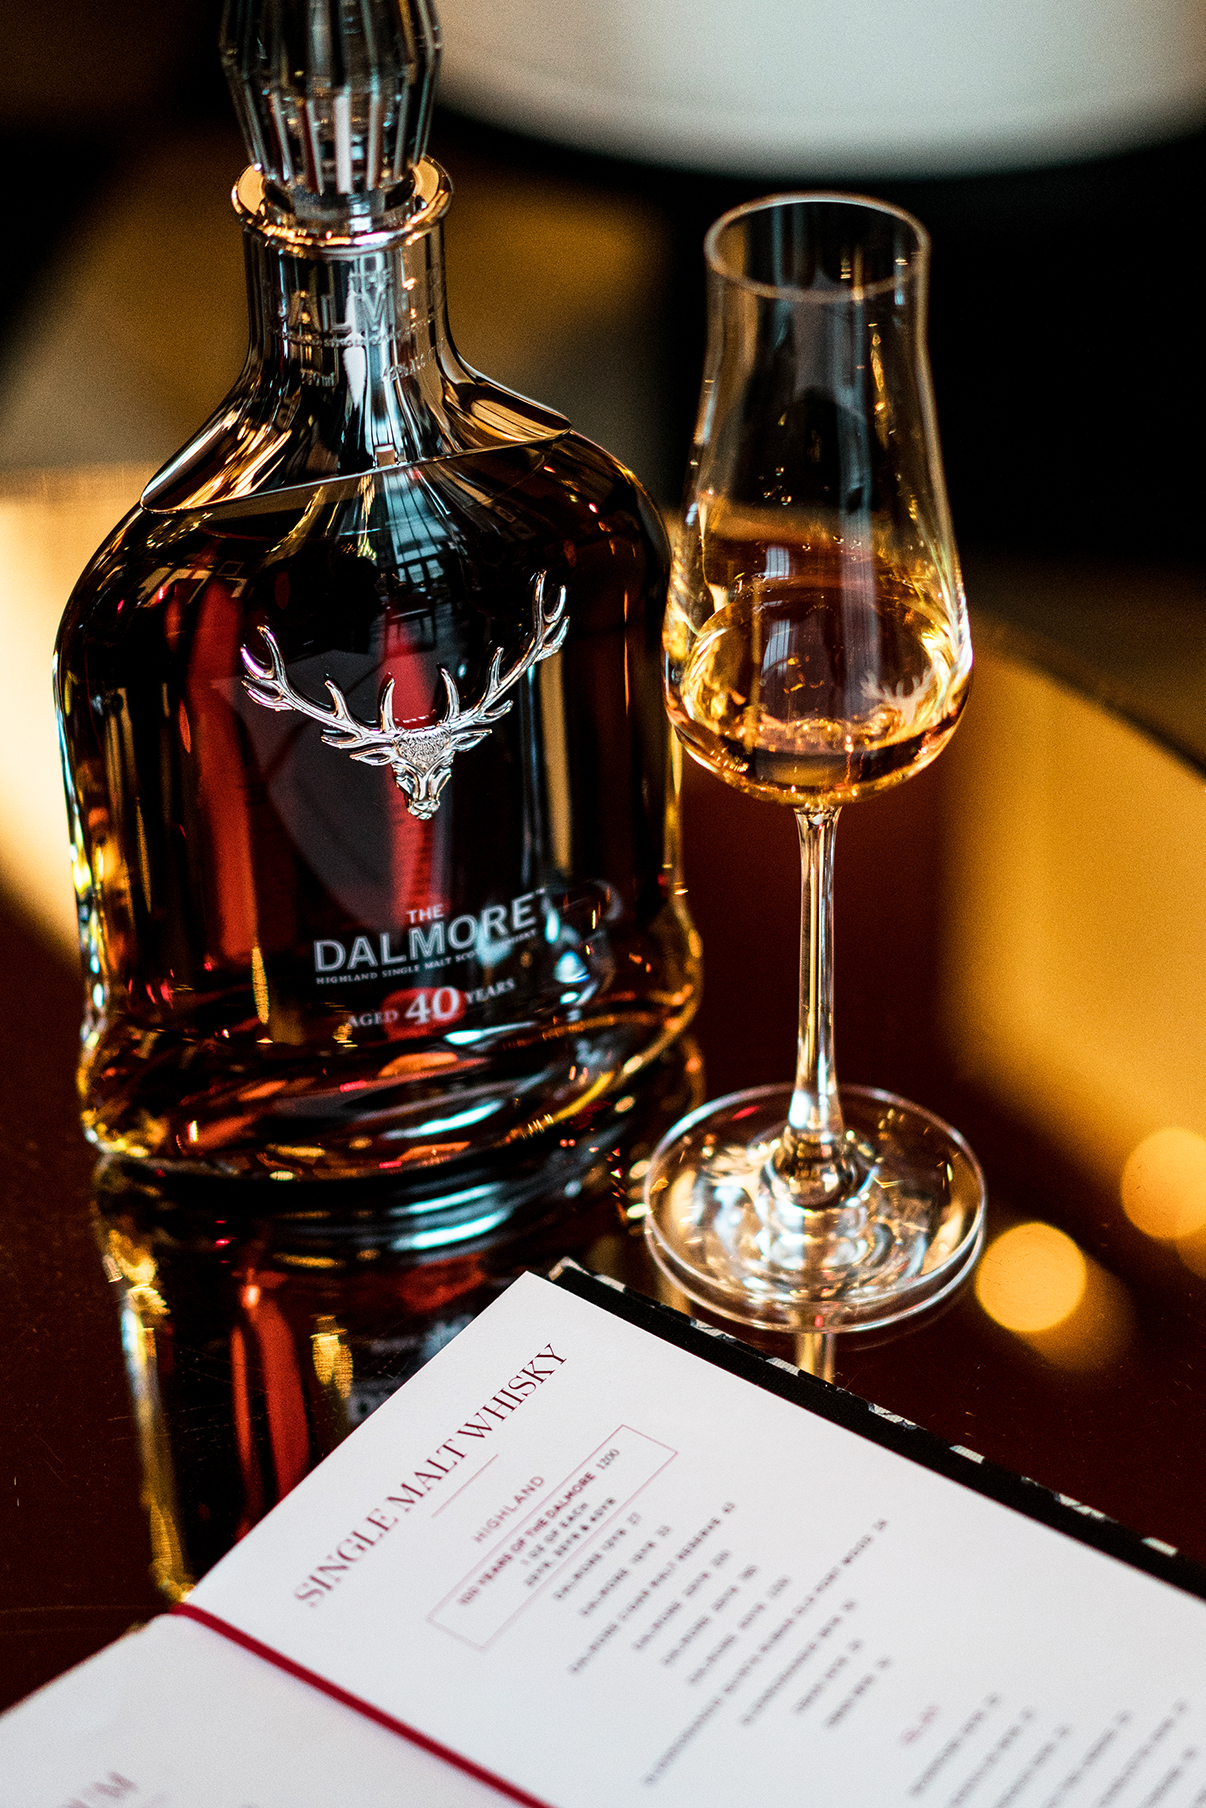 We Tried Baccarat's 100 Years of Dalmore Whisky Flight